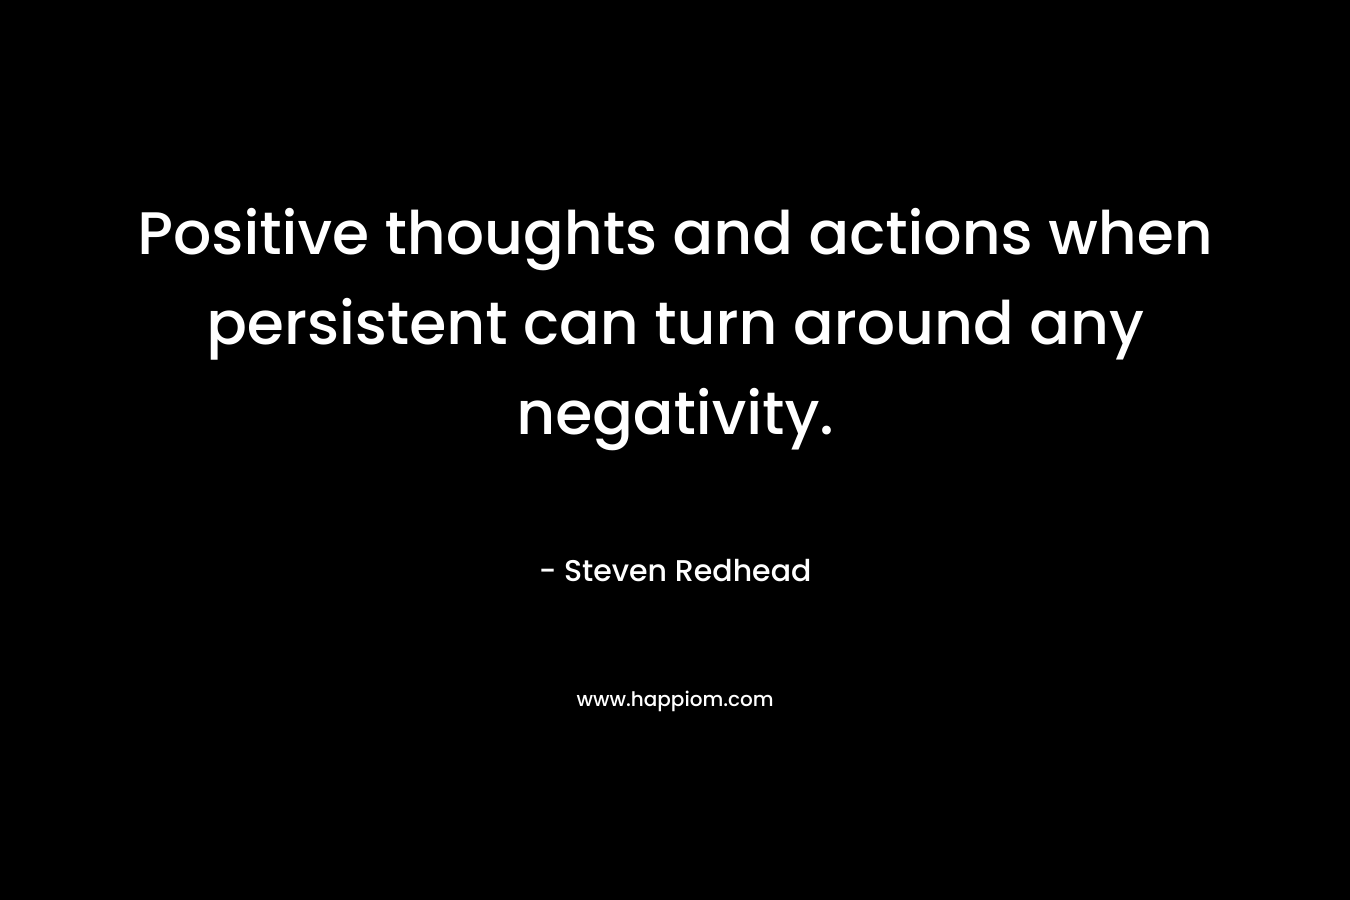 Positive thoughts and actions when persistent can turn around any negativity. – Steven Redhead